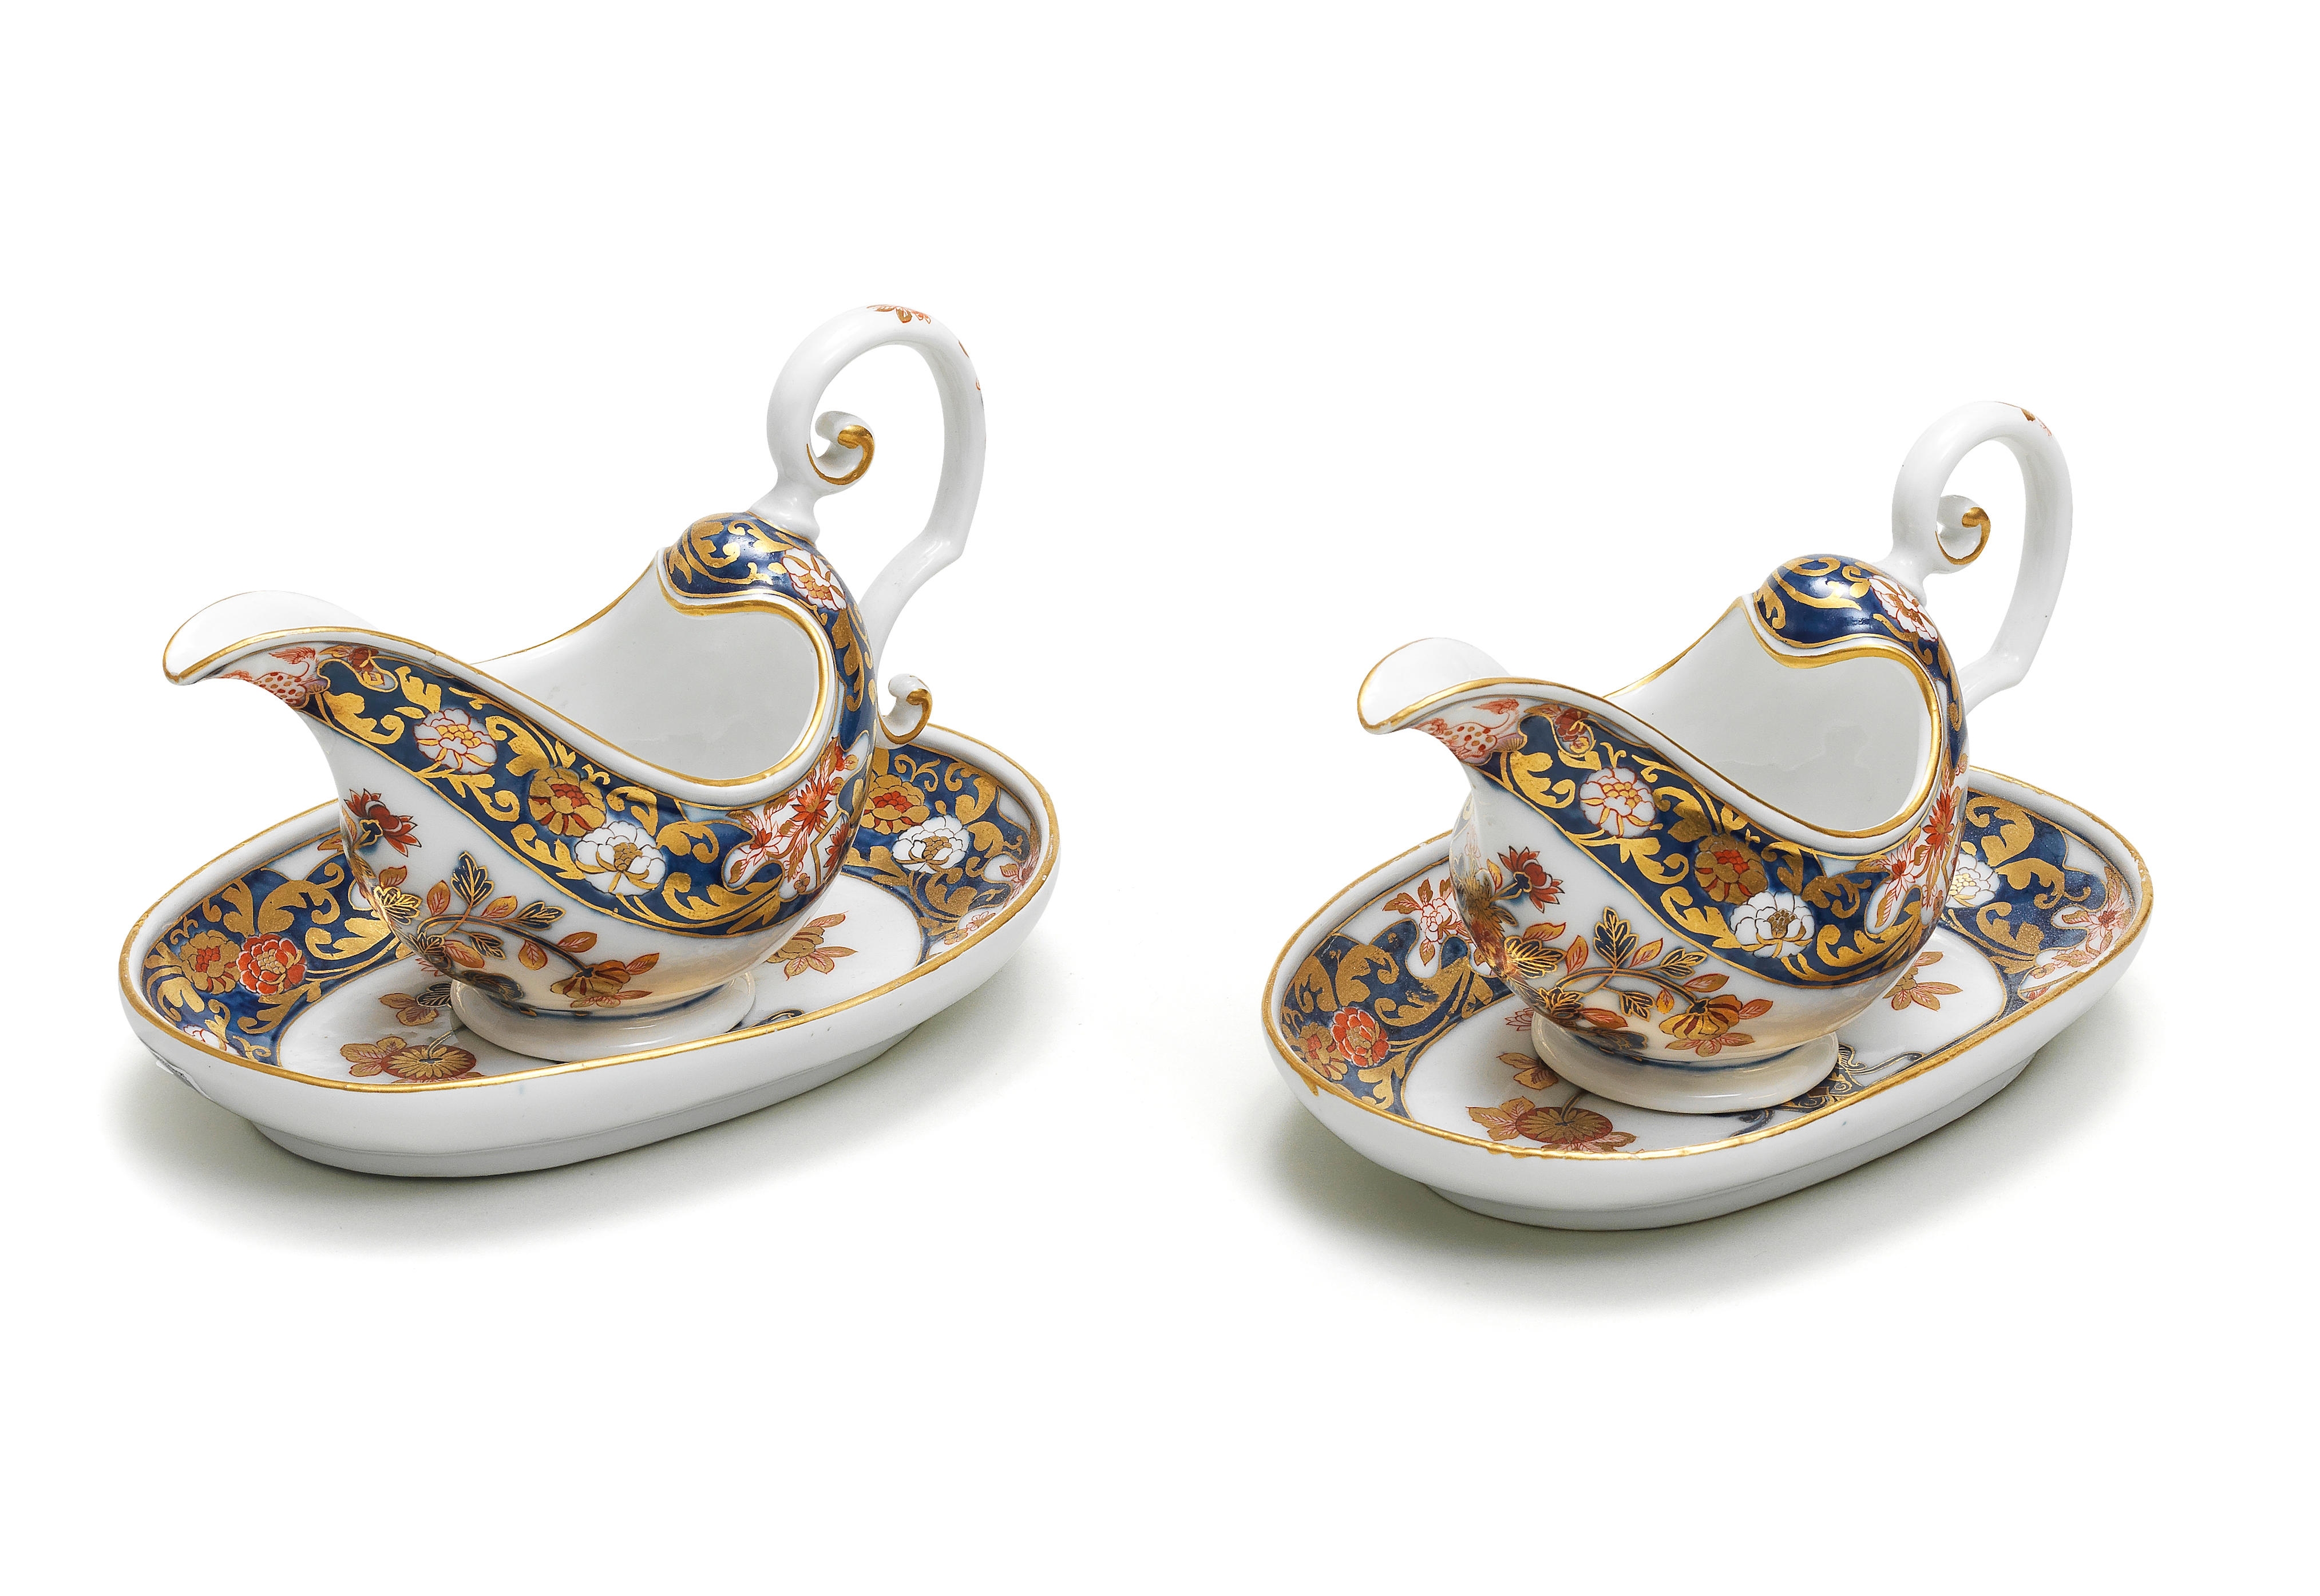 A very rare pair of Meissen Imari sauceboats and oval stands, circa 1740